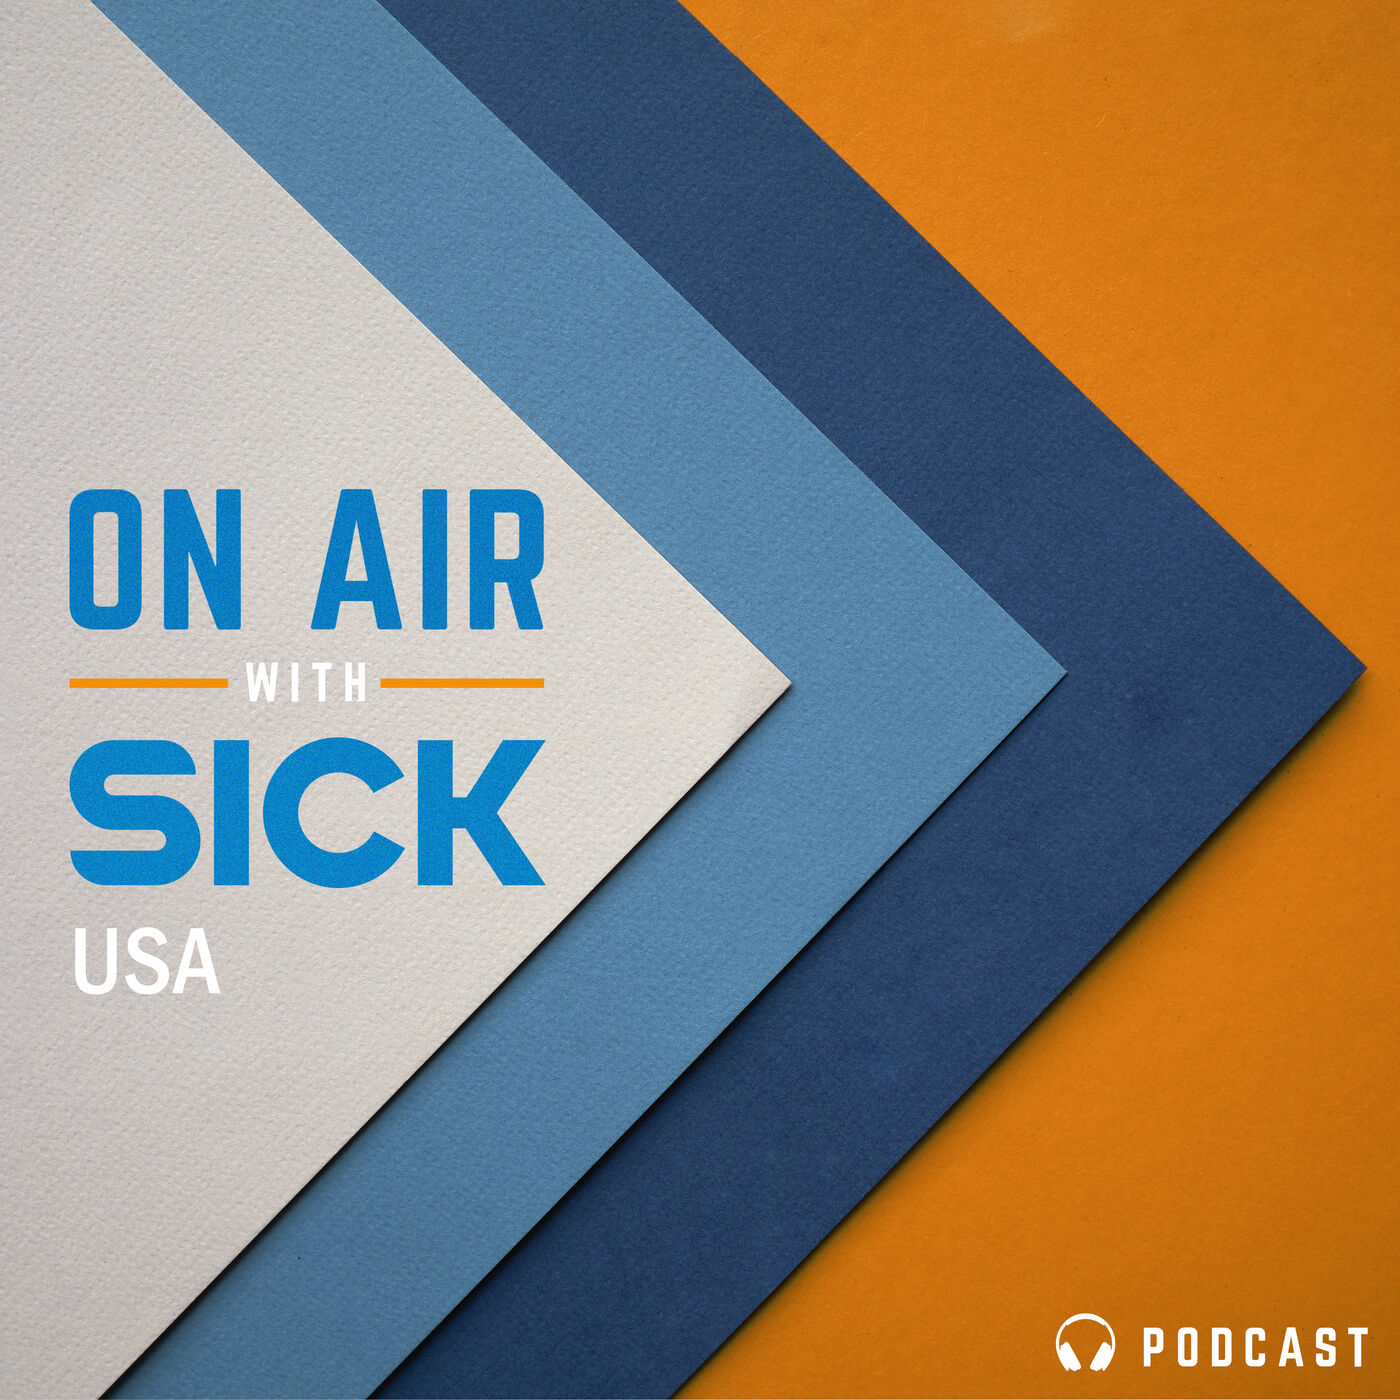 On Air With Sick Usa